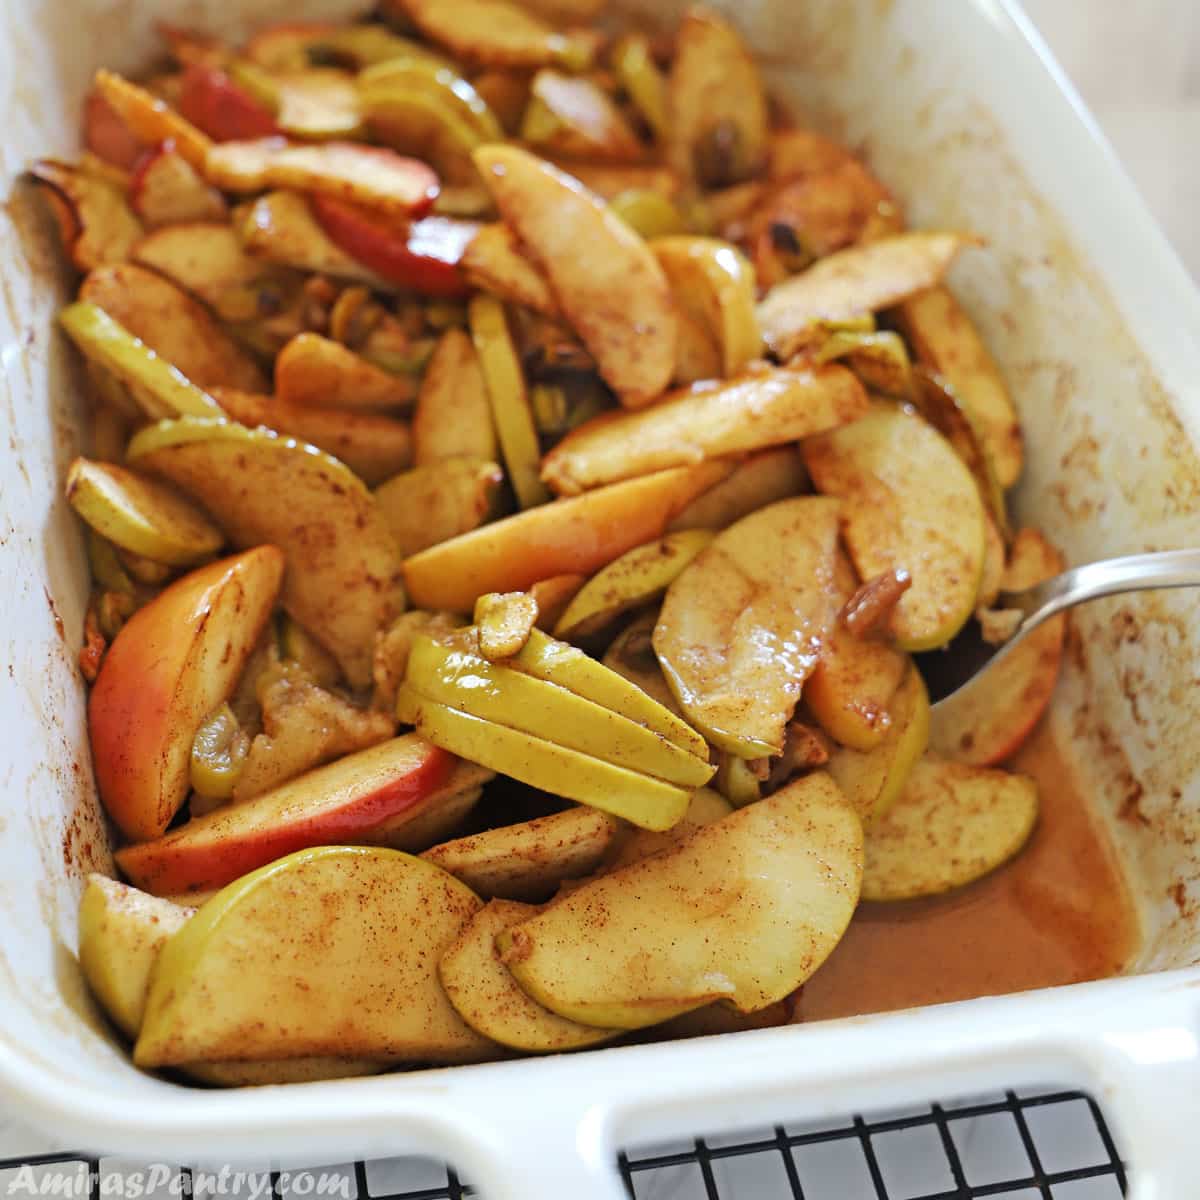 A white ceramic oven dish with healthy baked apple slices with a spoon in it.